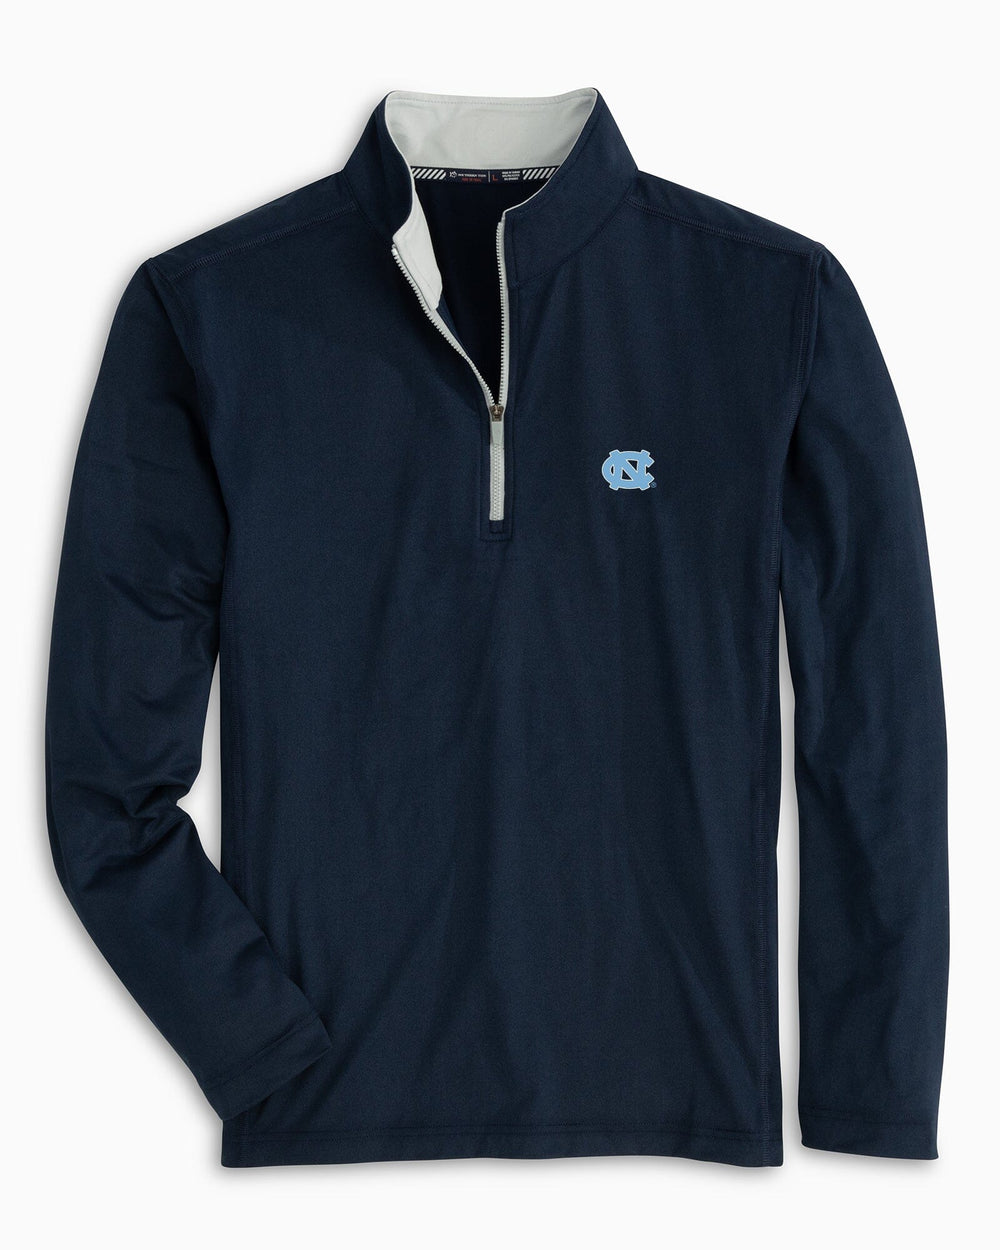 The front view of the UNC Tarheels Quarter Zip Pullover by Southern Tide - Navy